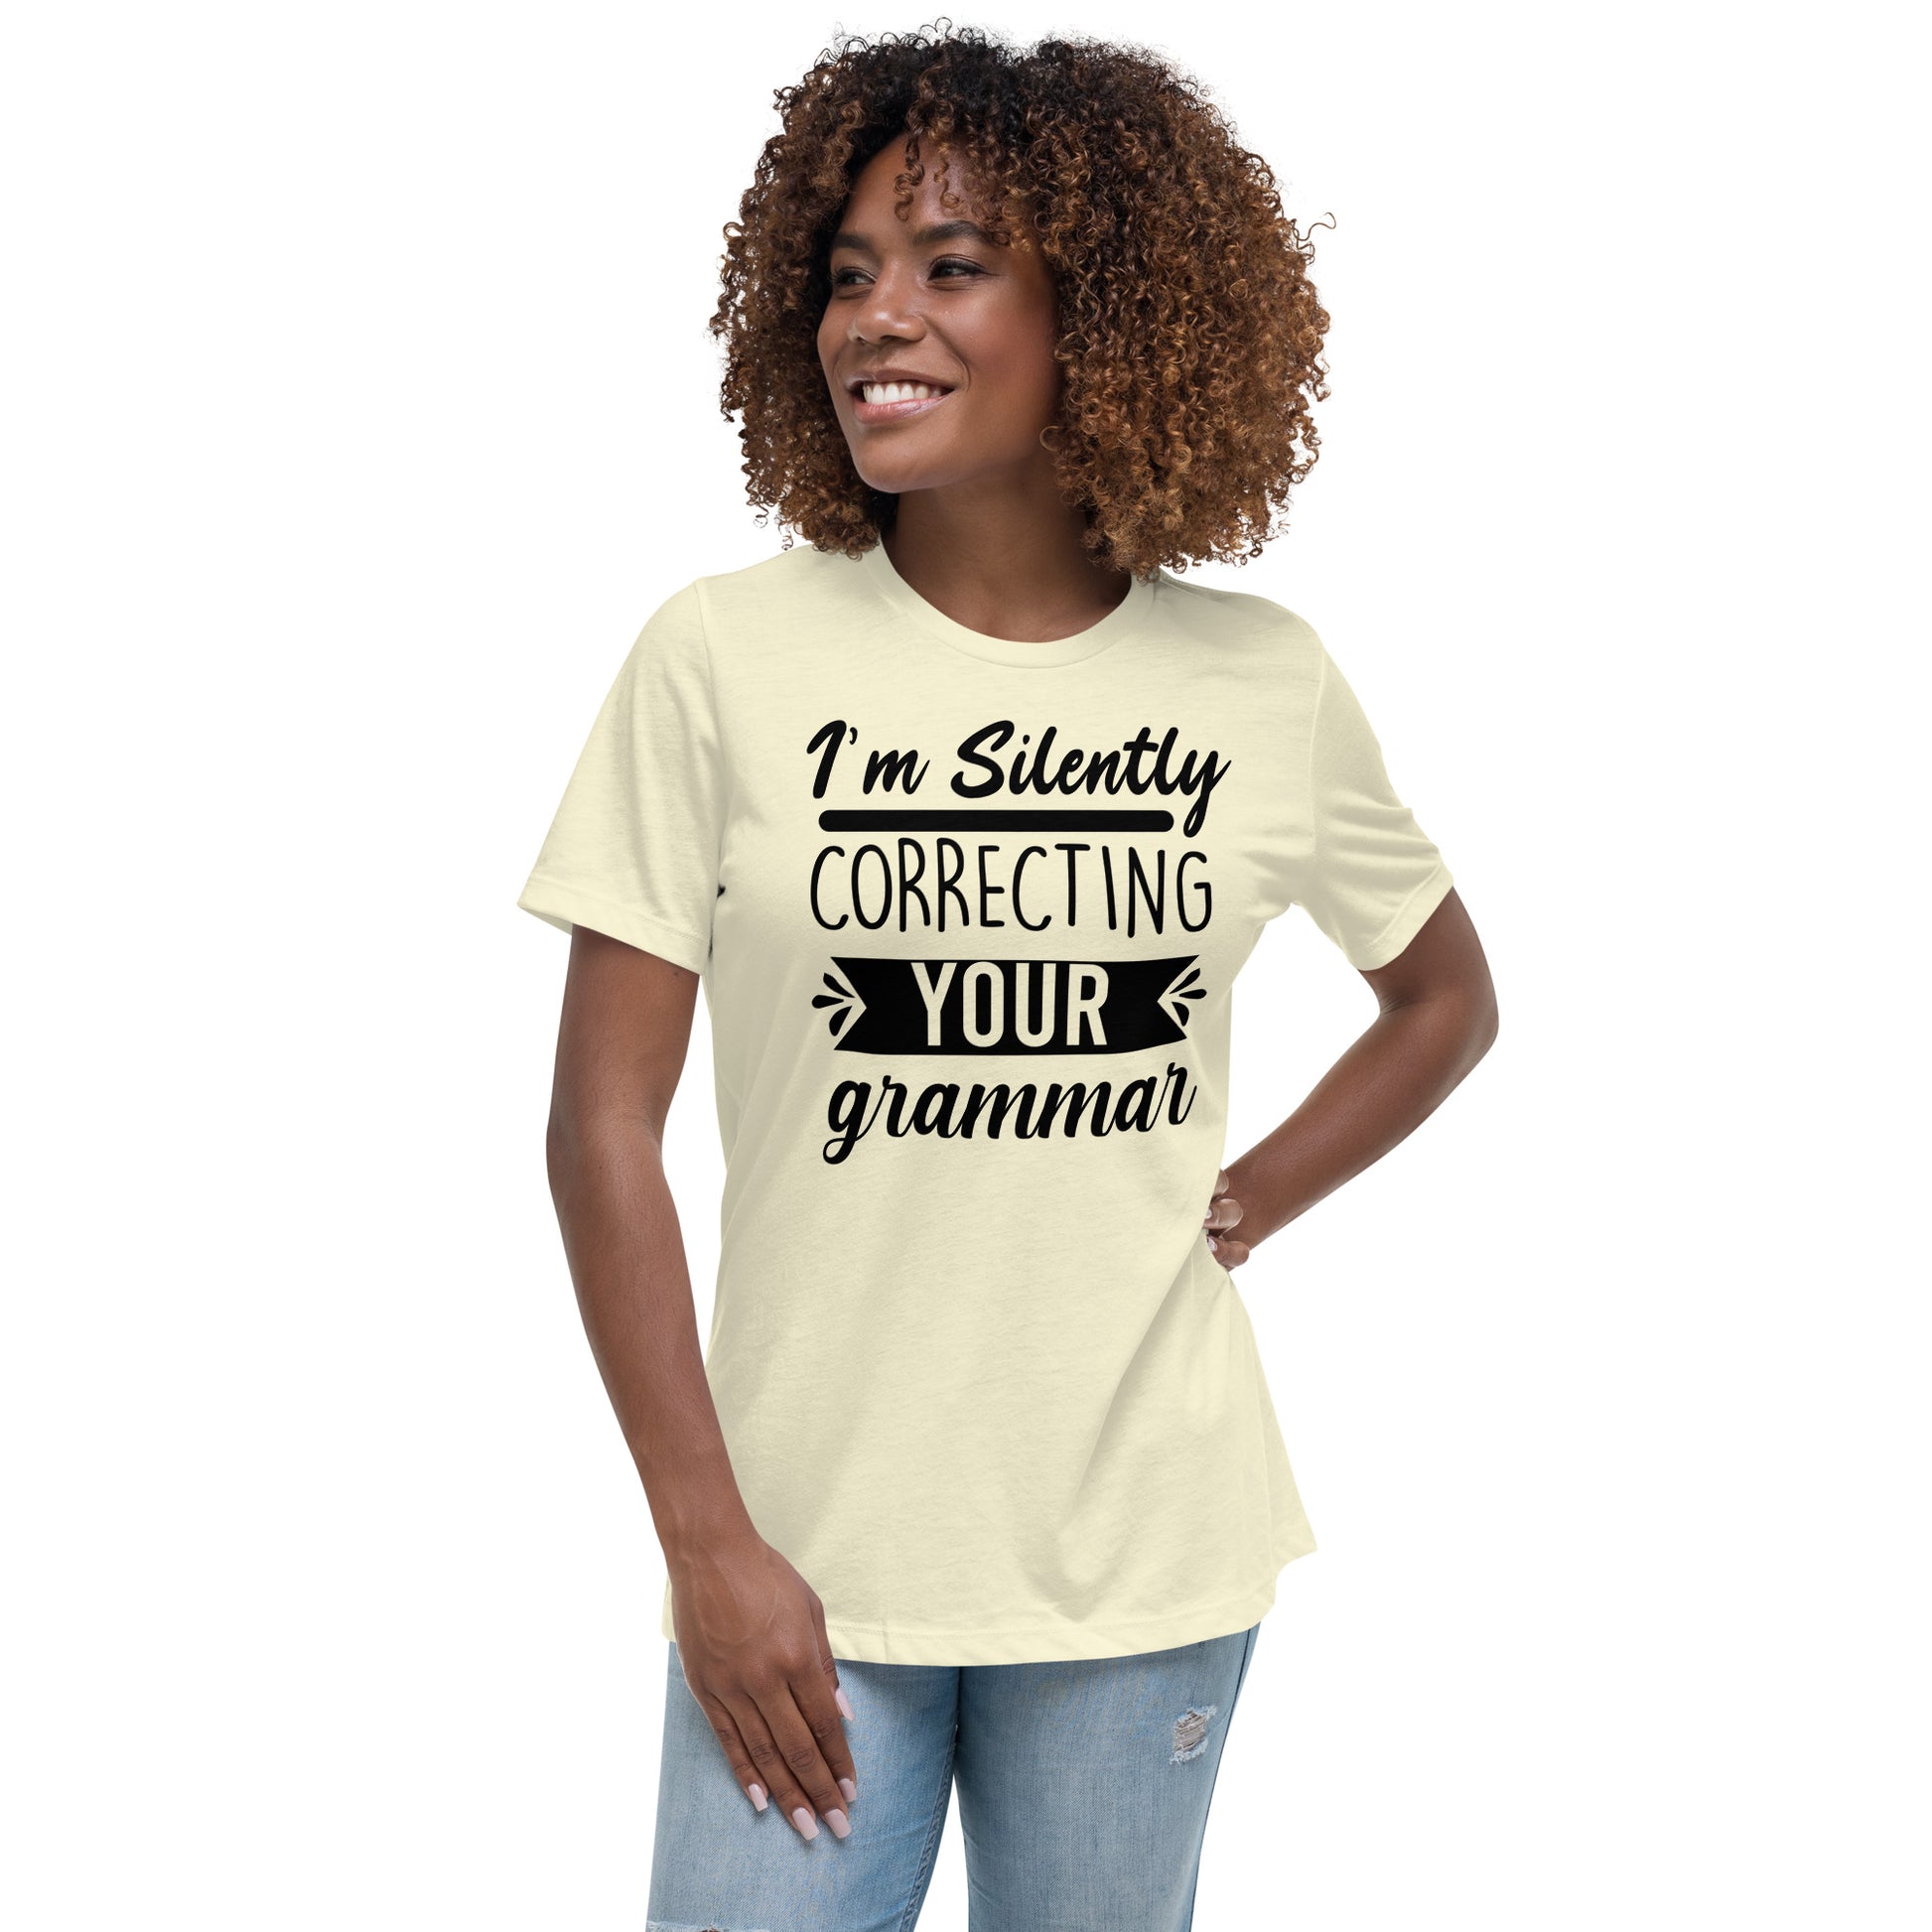 I'm Silently Correcting Your Grammar Women's Relaxed T-Shirt